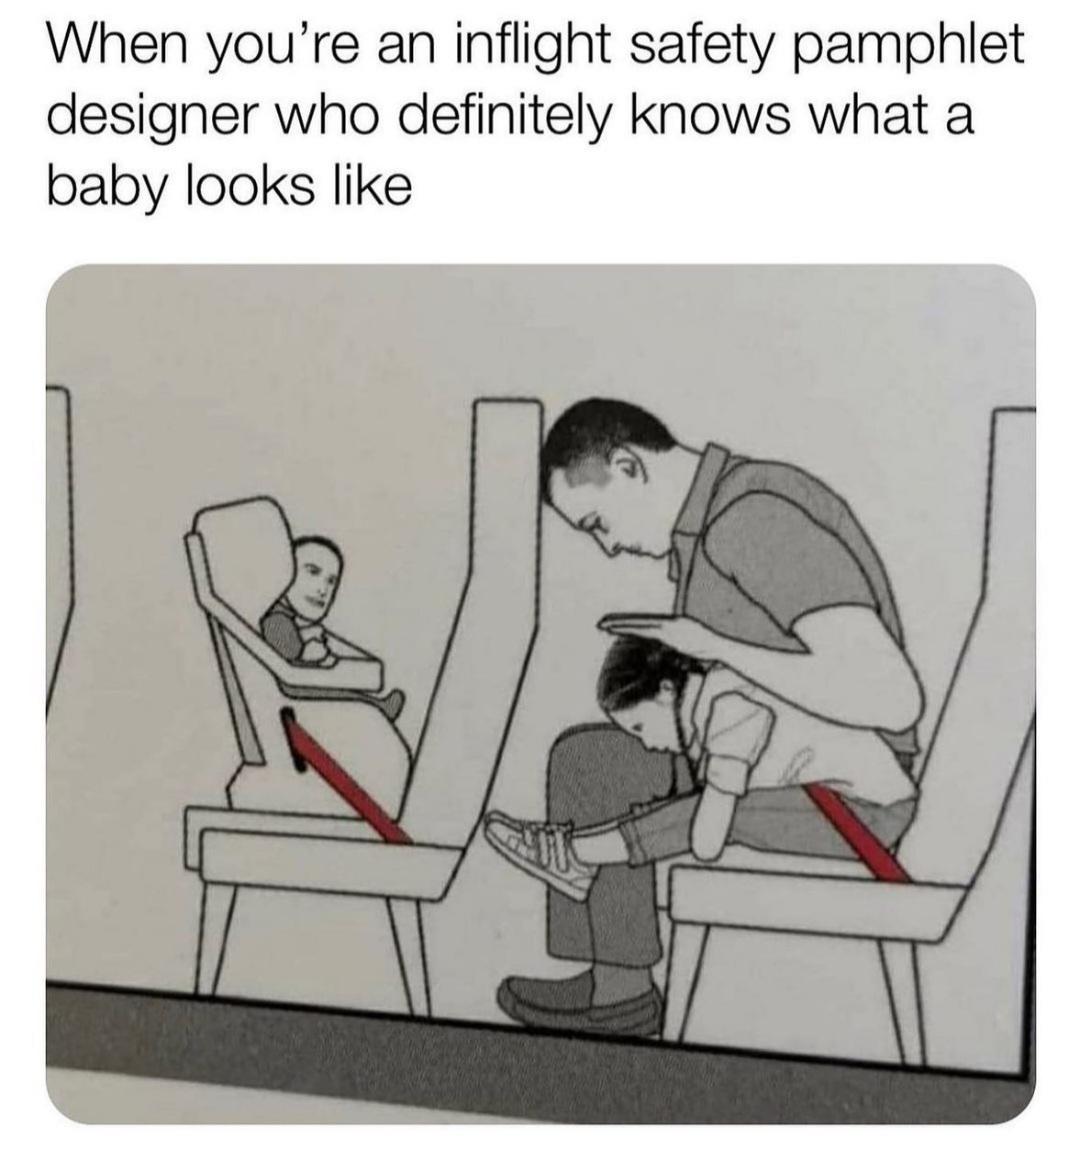 daily dose of randoms - Design - When you're an inflight safety pamphlet designer who definitely knows what a baby looks